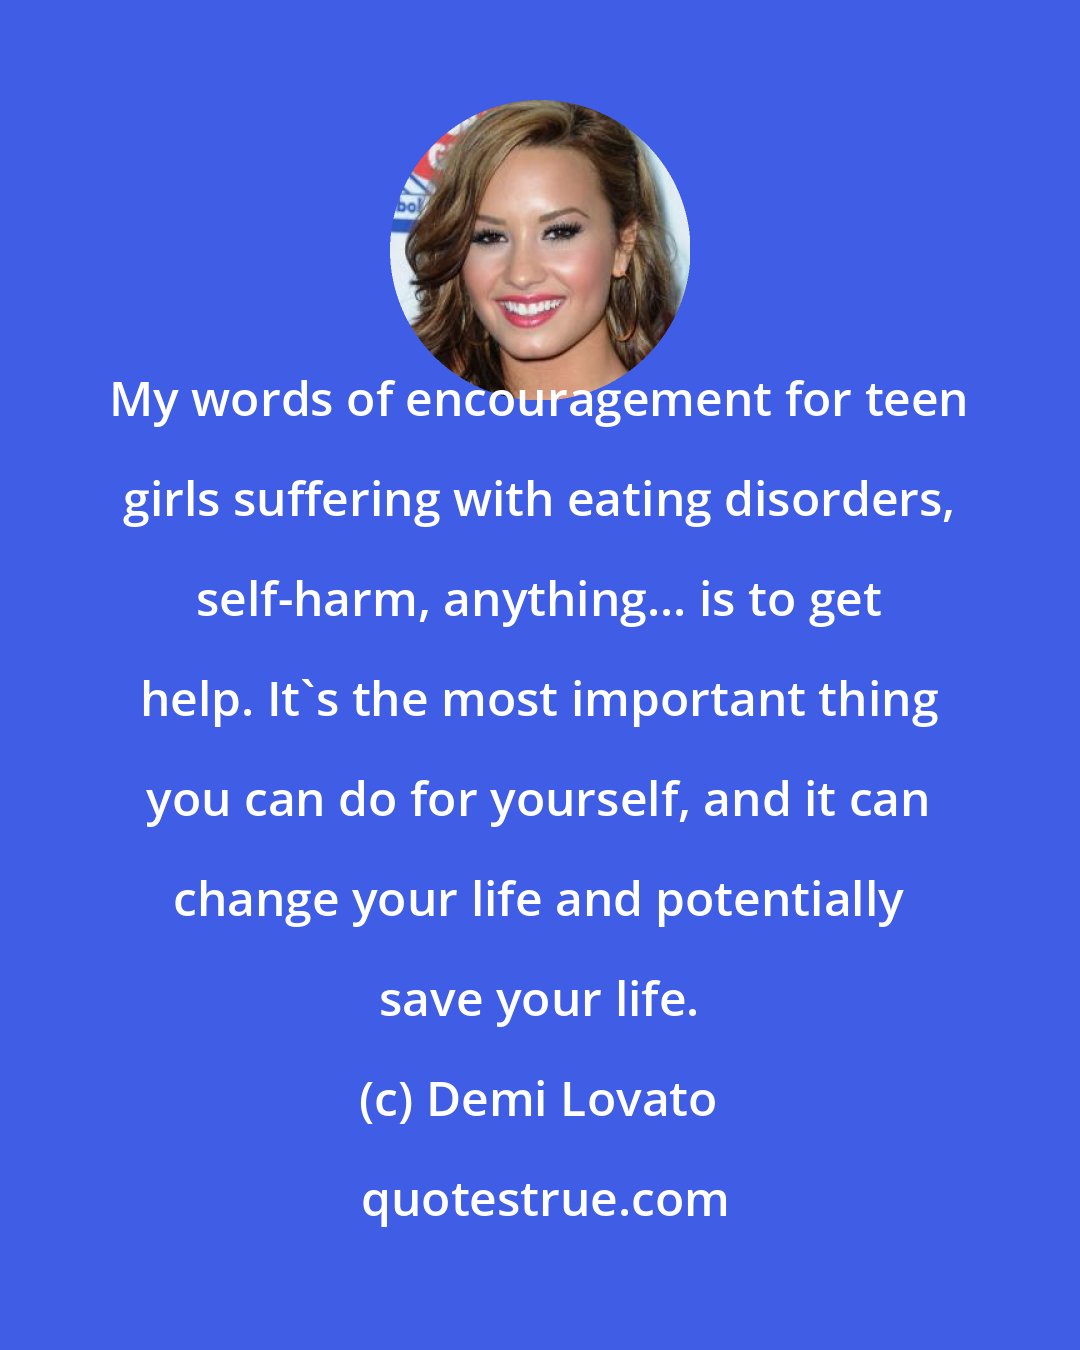 Demi Lovato: My words of encouragement for teen girls suffering with eating disorders, self-harm, anything... is to get help. It's the most important thing you can do for yourself, and it can change your life and potentially save your life.